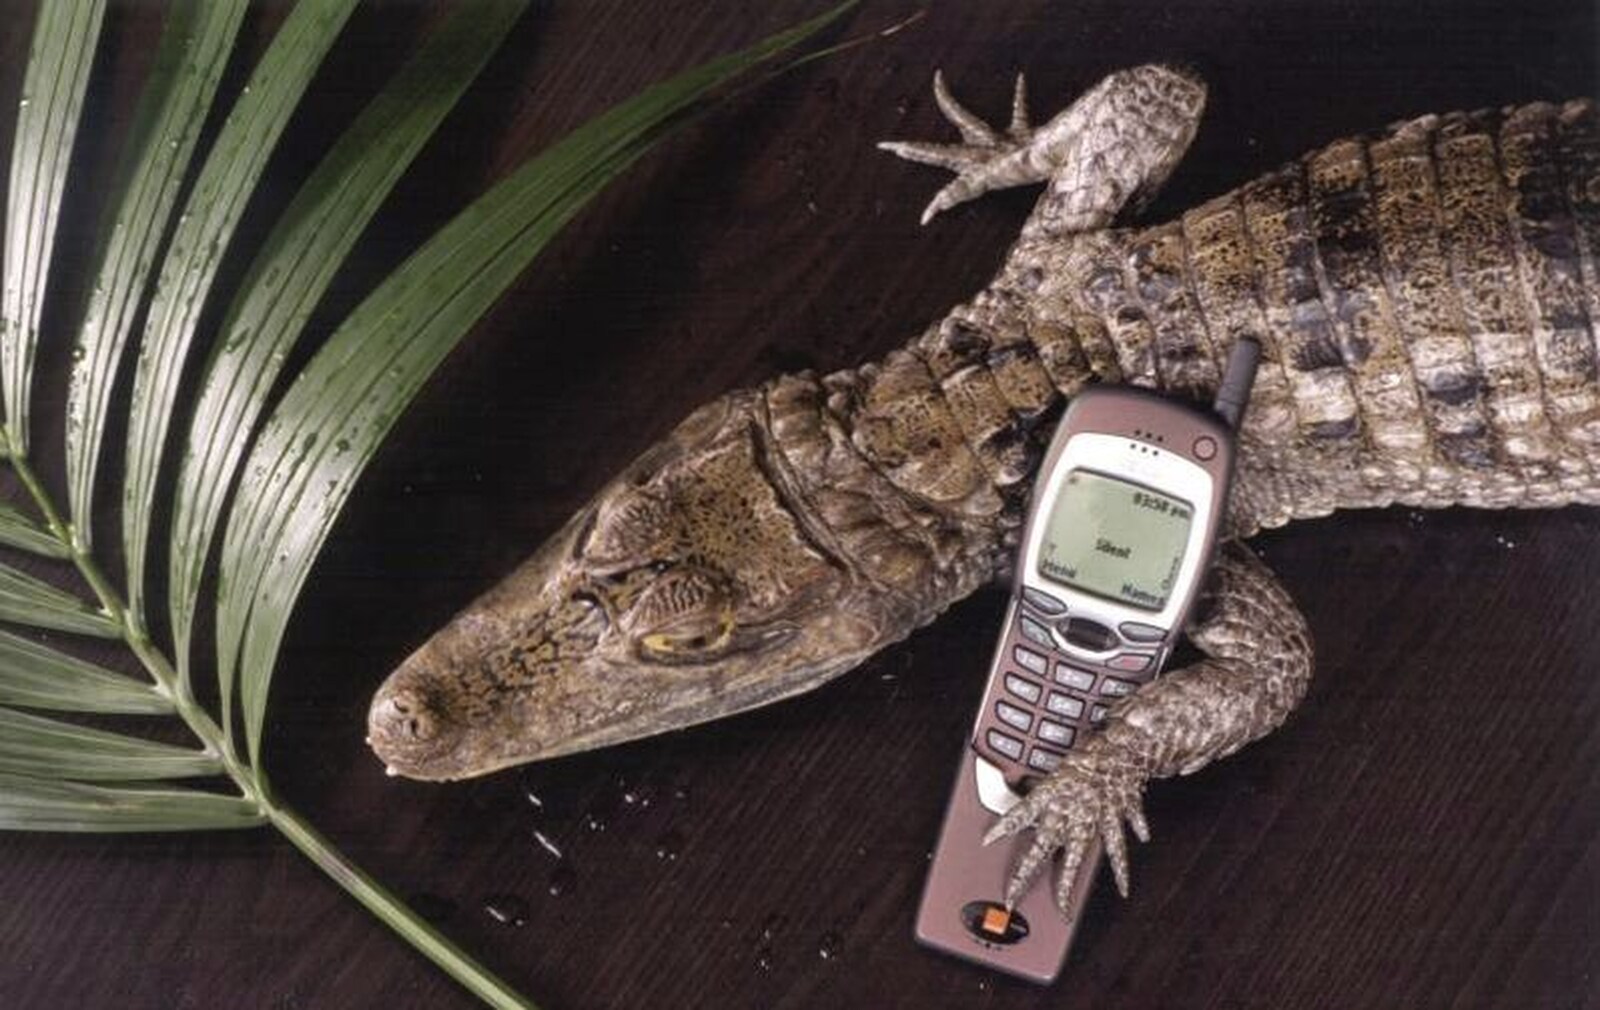 The cayman makes a call on a Nokia from A 3G Lab/Trigenix Miscellany, Matrix House, Cambridge - 25th September 2004